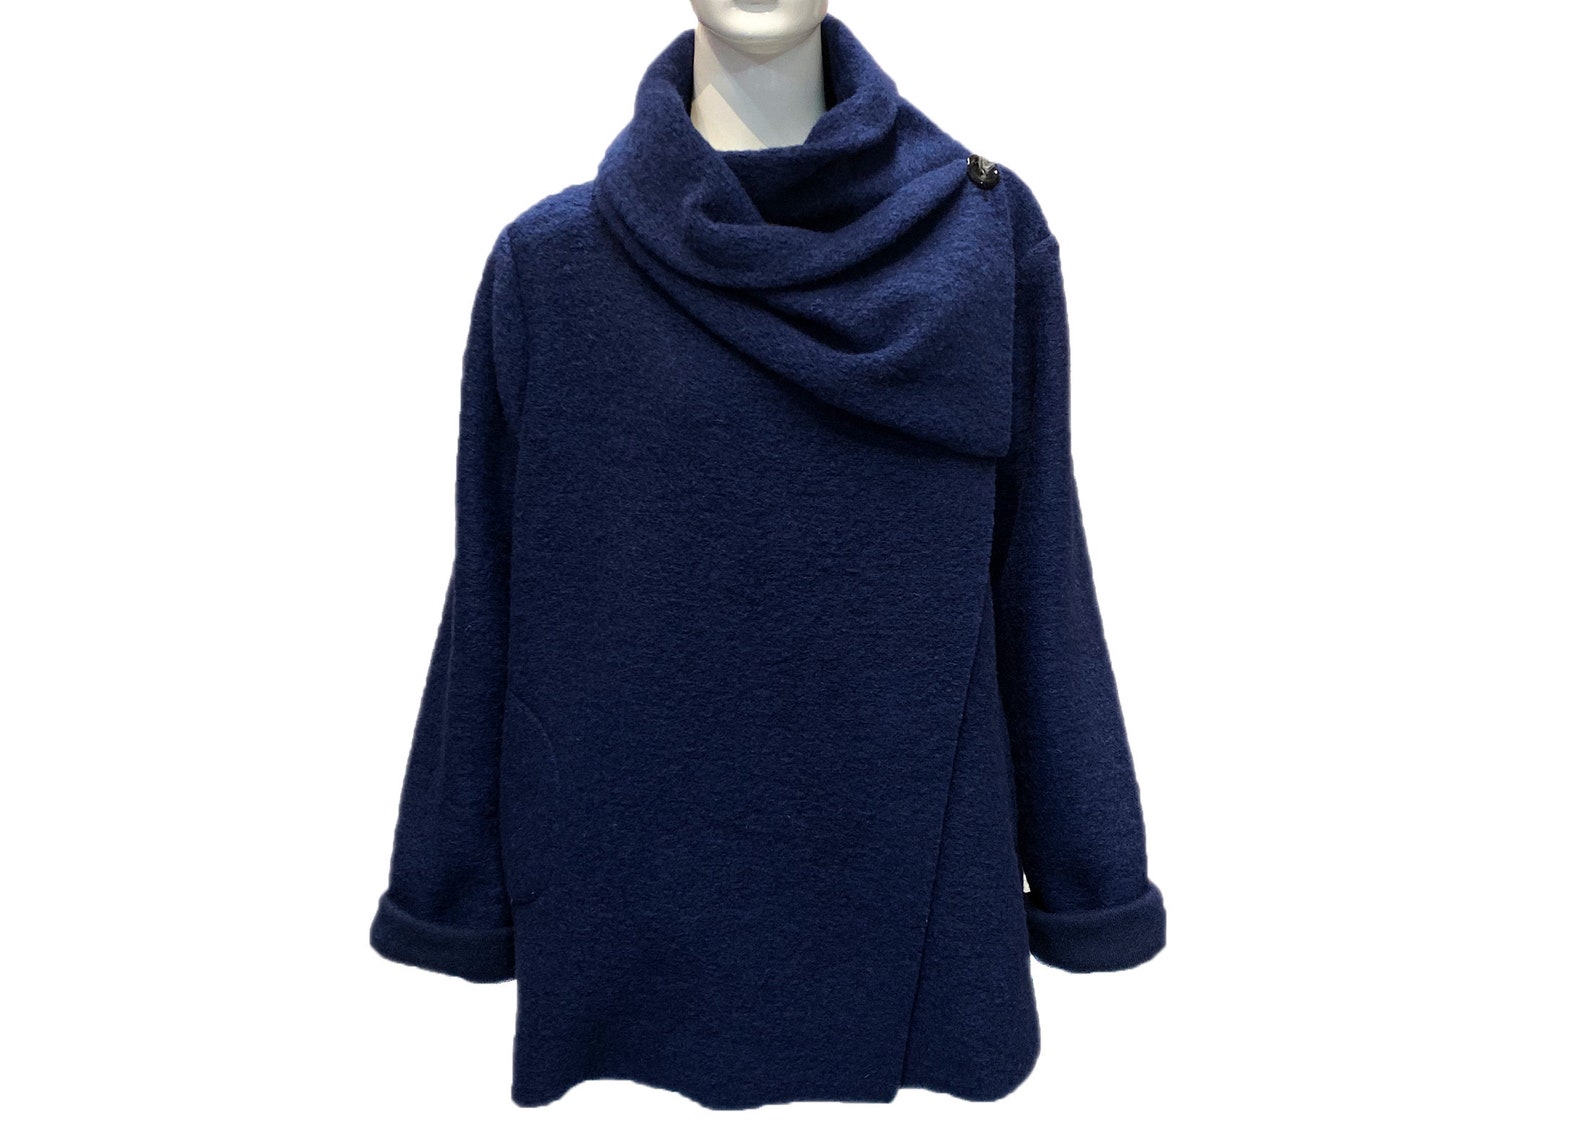 Winter Ladies Boiled Felted Wool Mix 2 Pockets/ Cowl Neck / Lagenlook ...